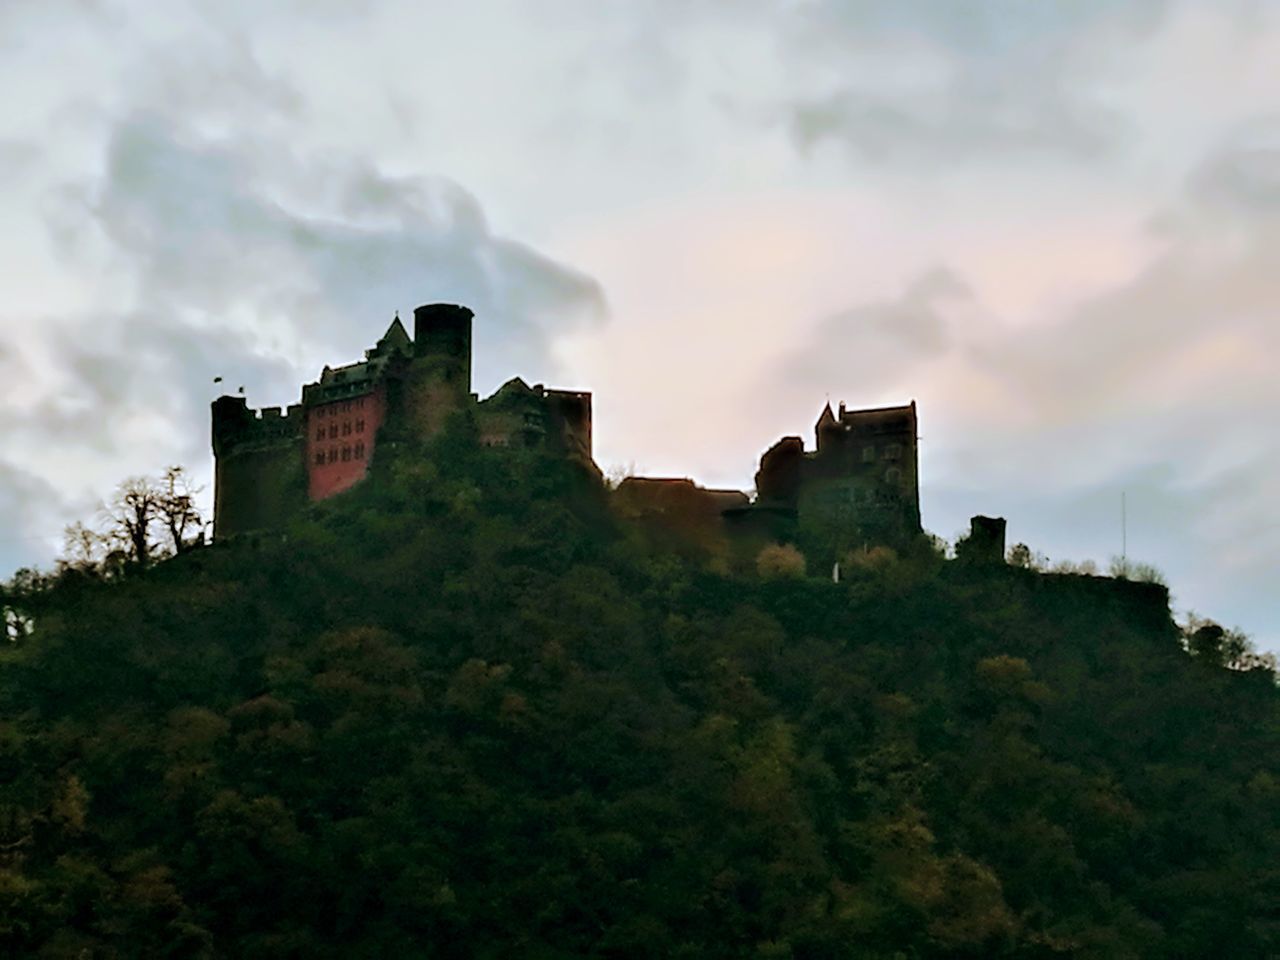 LOW ANGLE VIEW OF CASTLE AGAINST CLOUDY SKY